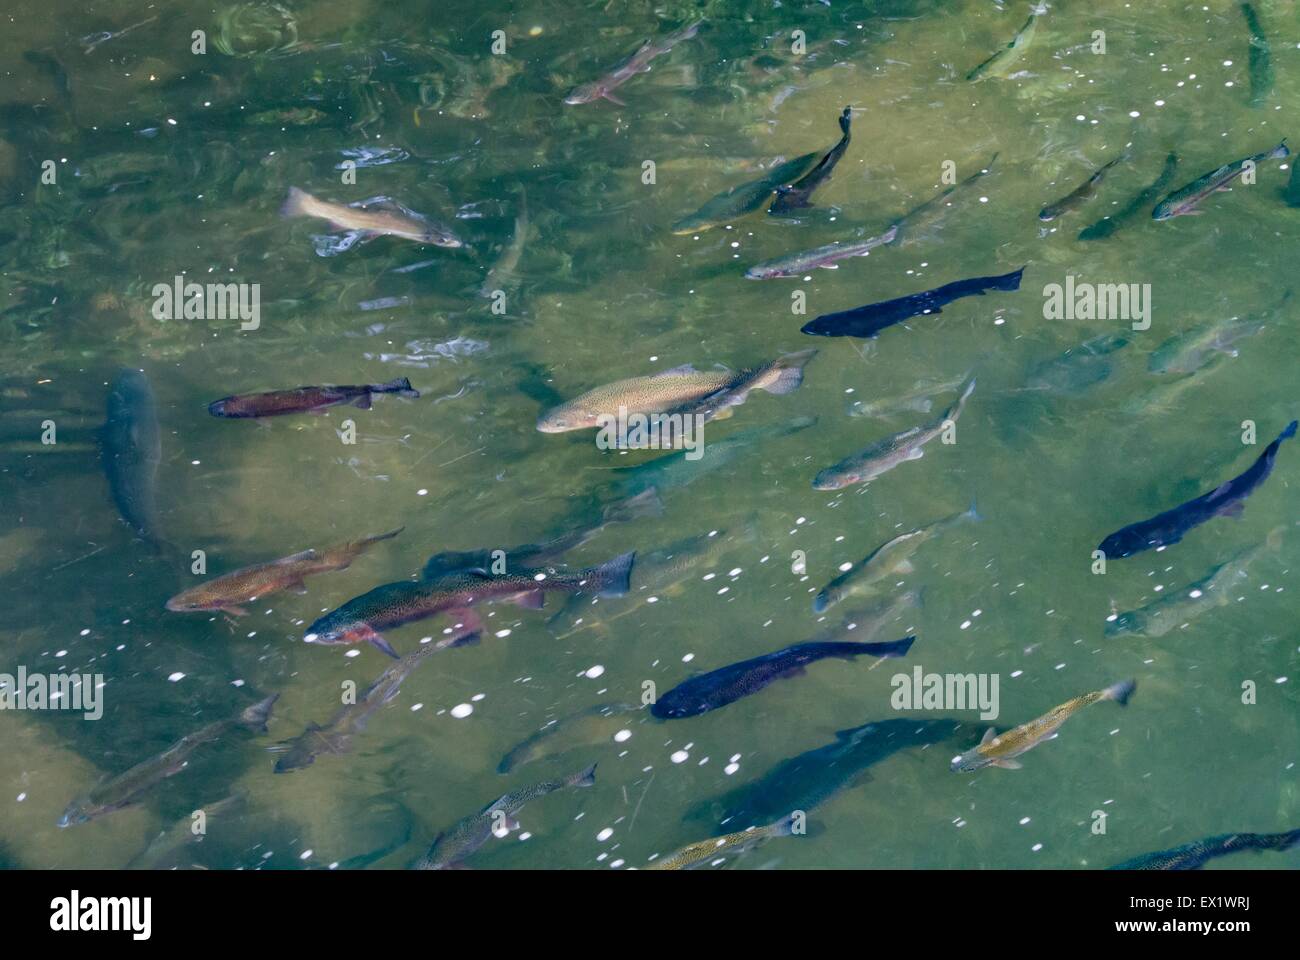 Rainbow trout shoal in freshwater Stock Photo